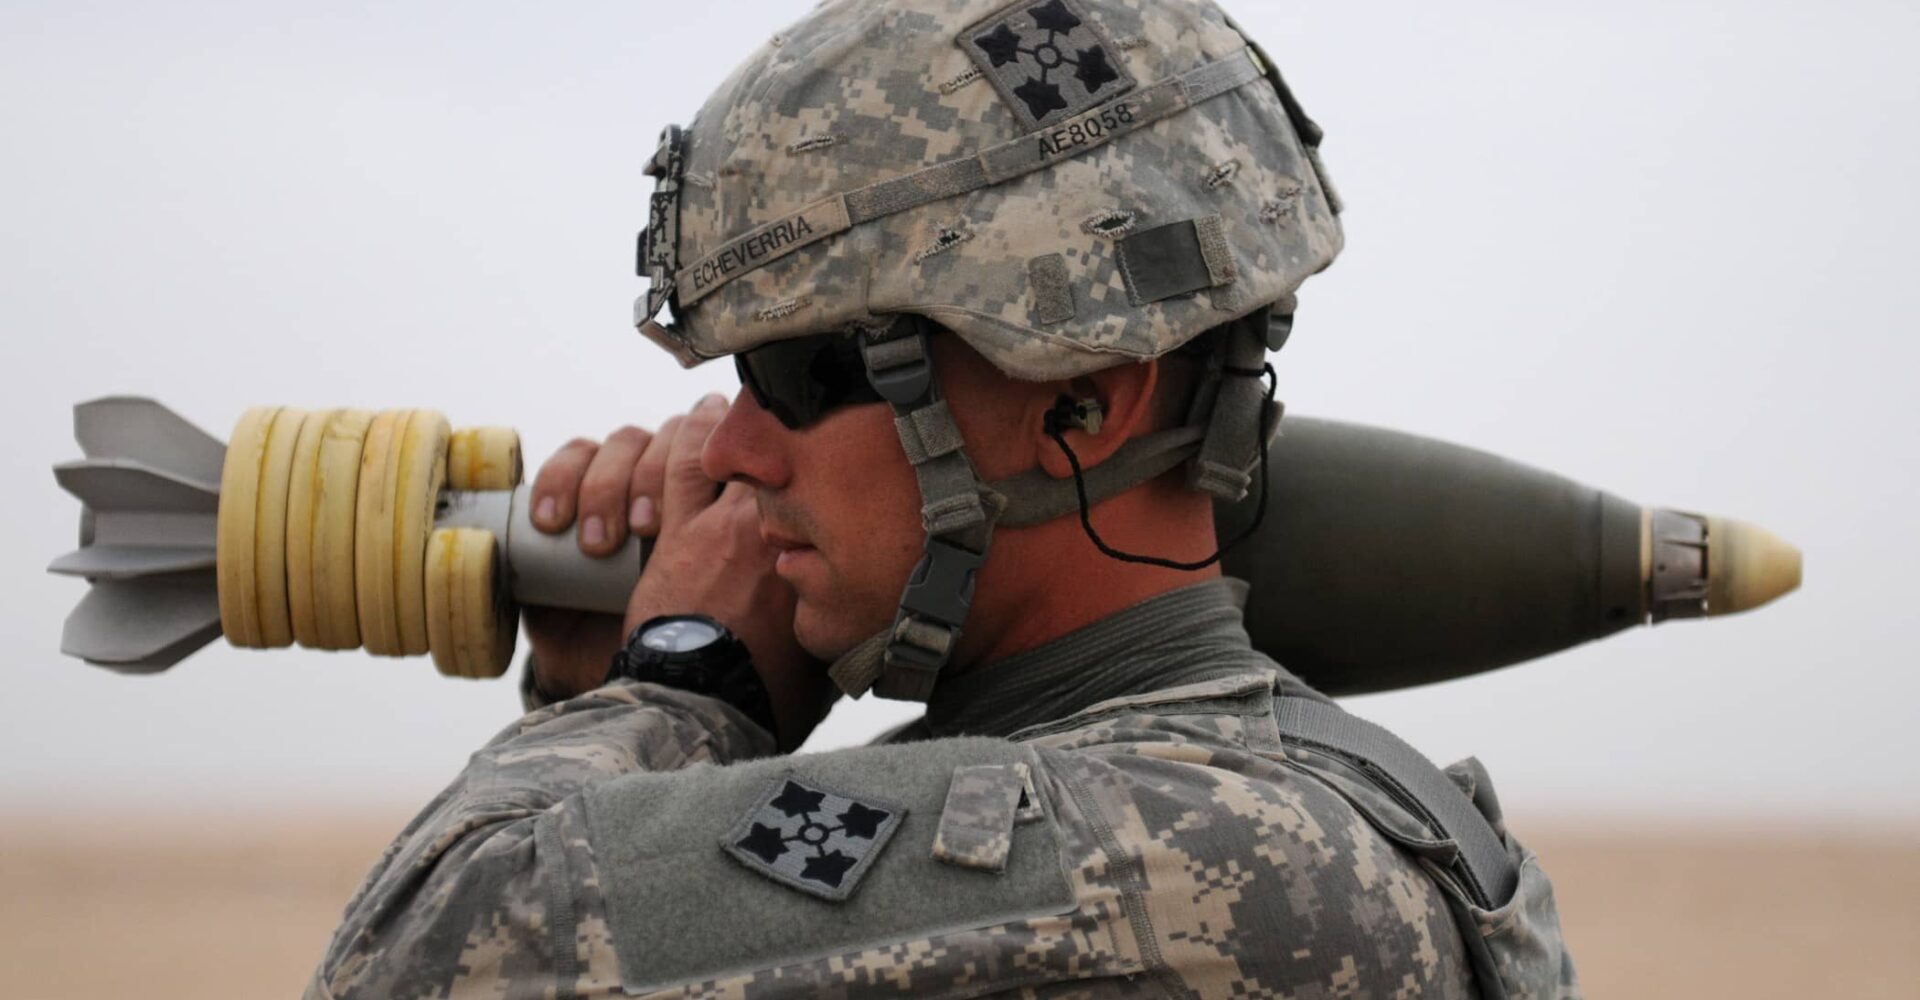 US Army researcher discover nanoparticles for future weapon systems